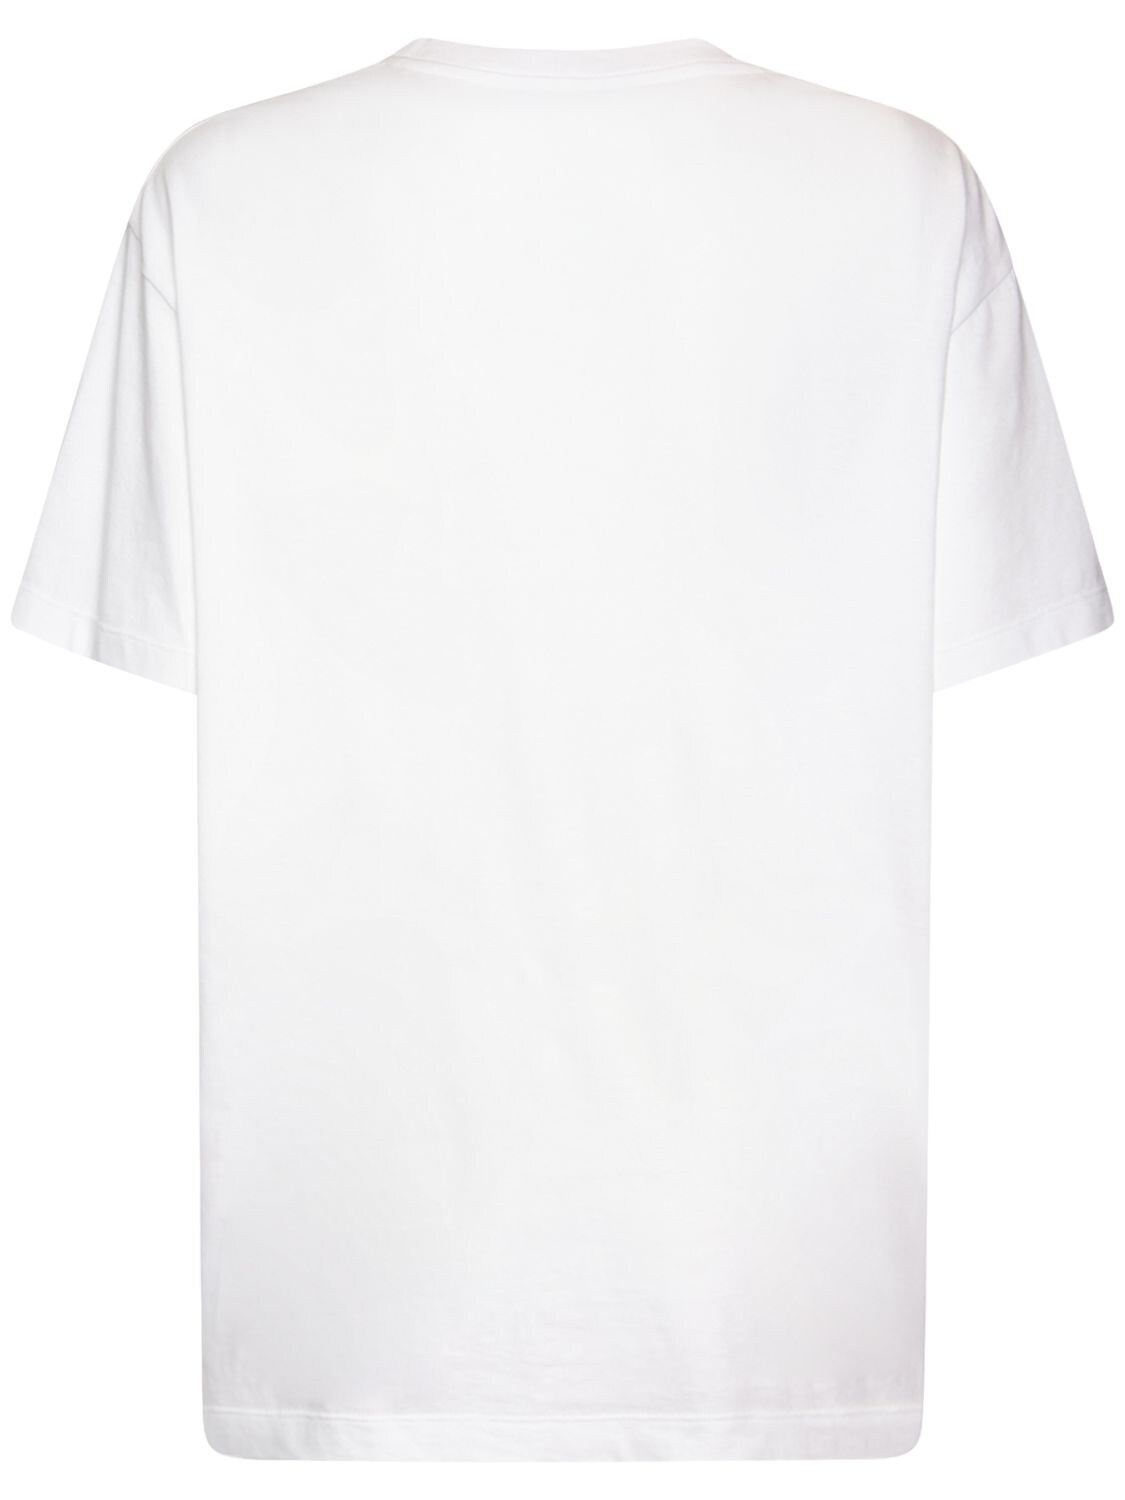 VALENTINO SEQUENCE LOGO COTTON JERSEY T-SHIRT 75I52O007-MEJP0